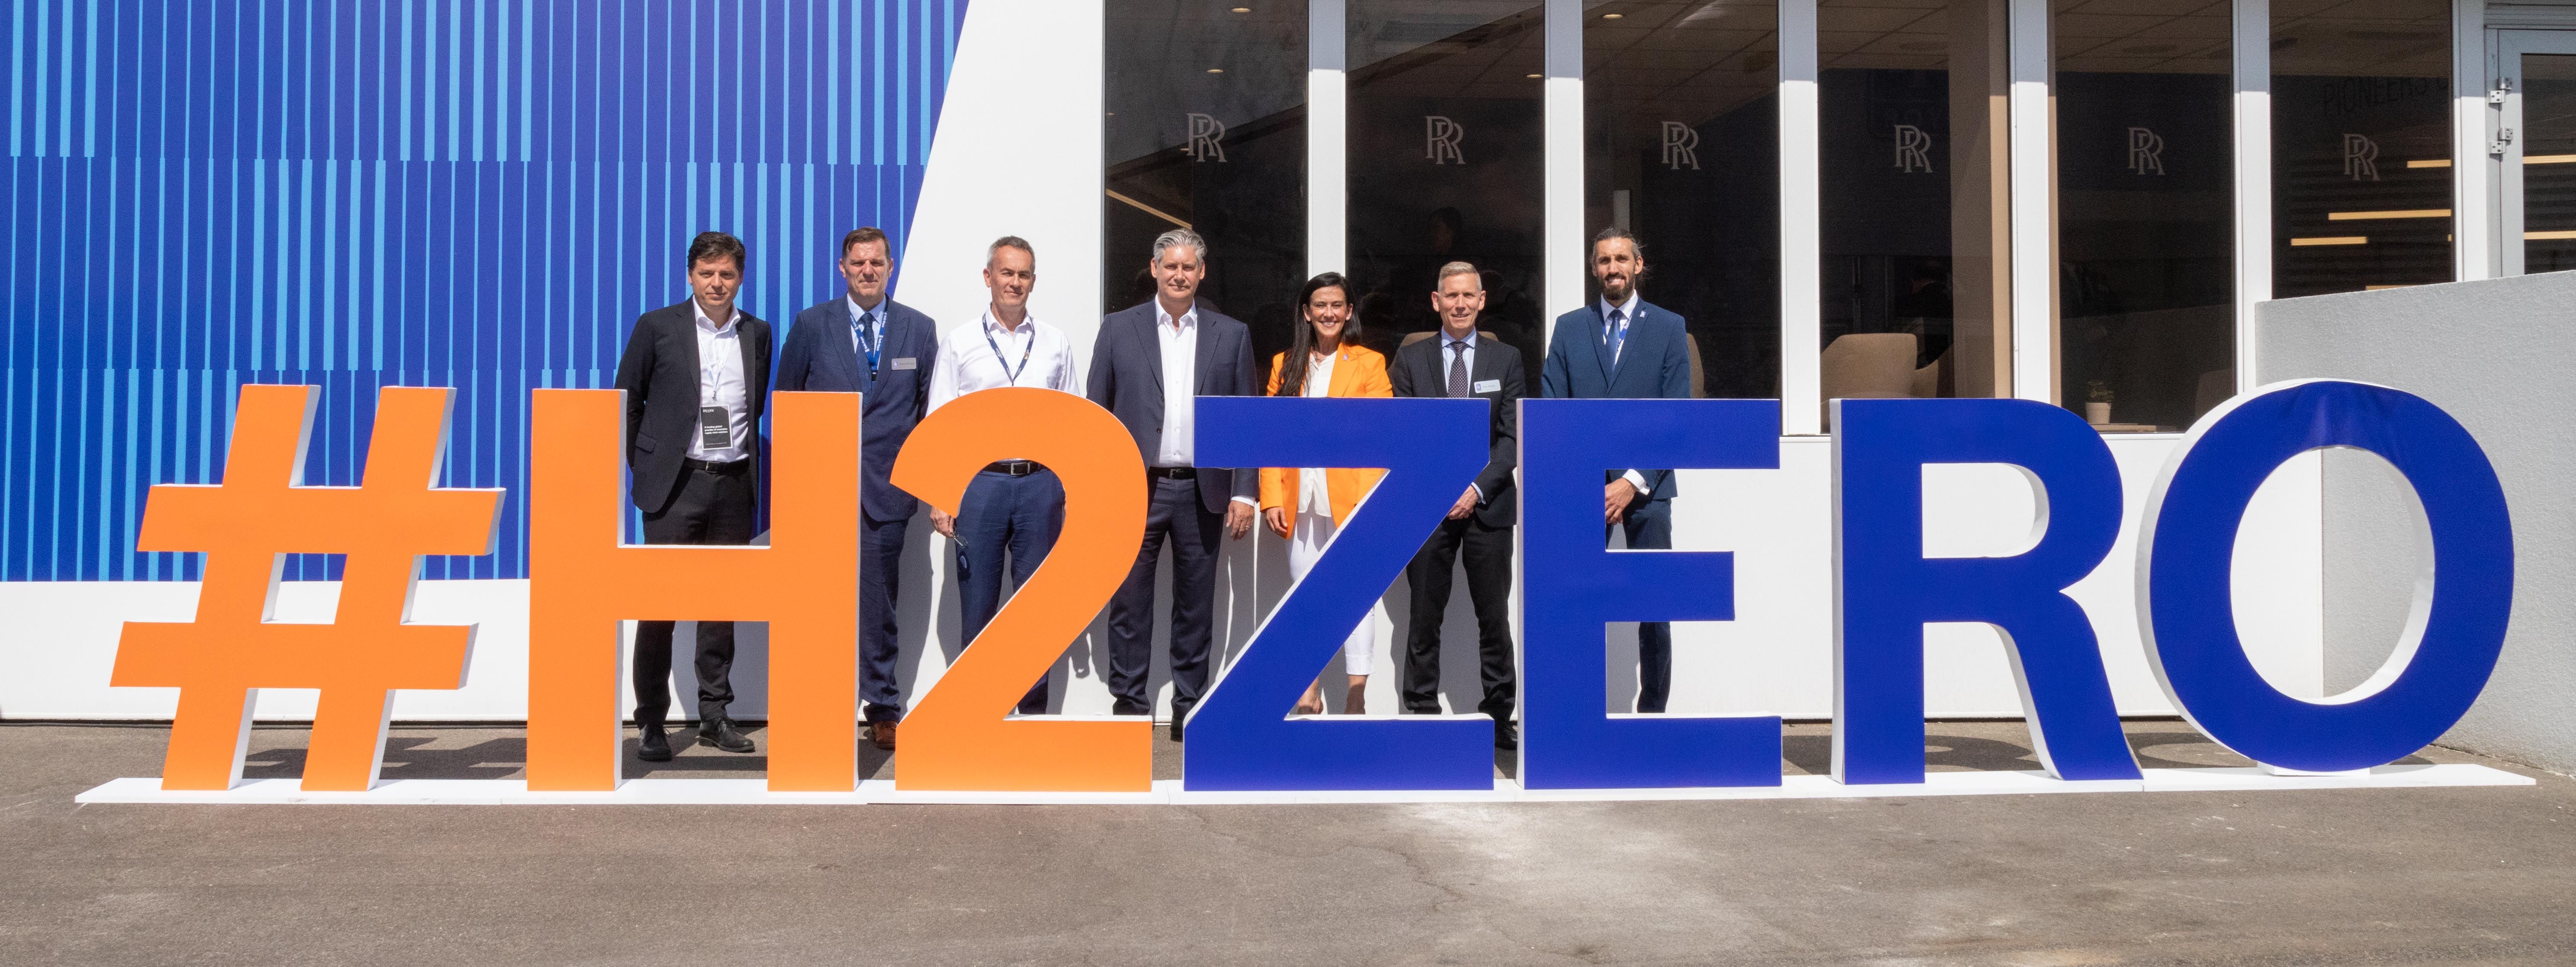 easyjet-and-rolls-royce-pioneer-hydrogen-engine-combustion-technology-in-h2zero-partnership_52227143205_o